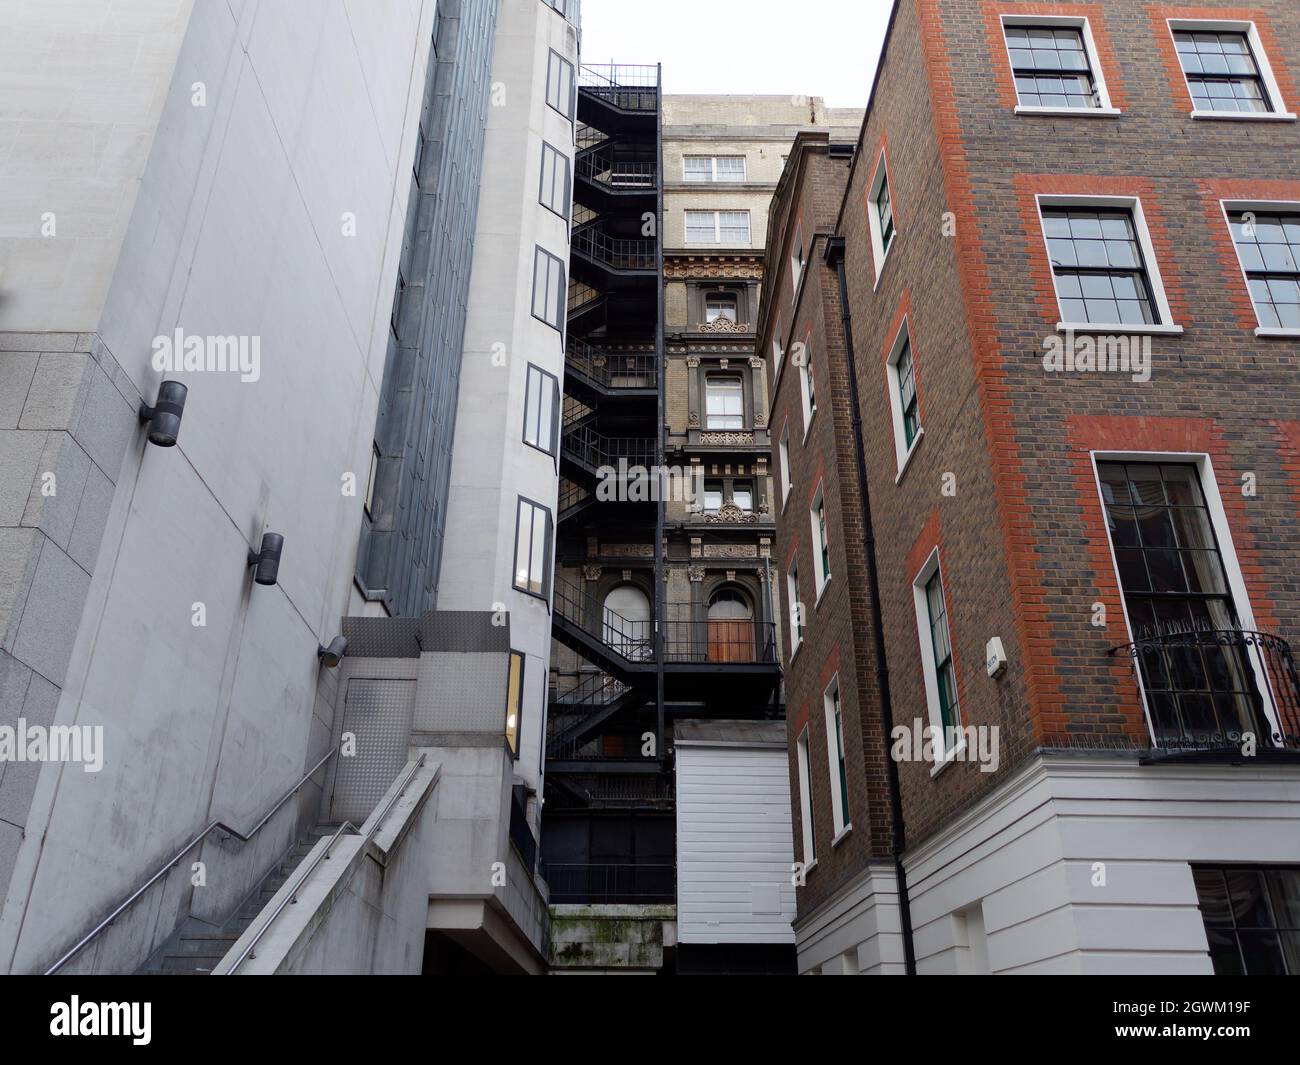 London, Greater London, England, September 21 2021: External urban staircase at the rear of a property off Craven Street near Charing Cross Station. Stock Photo